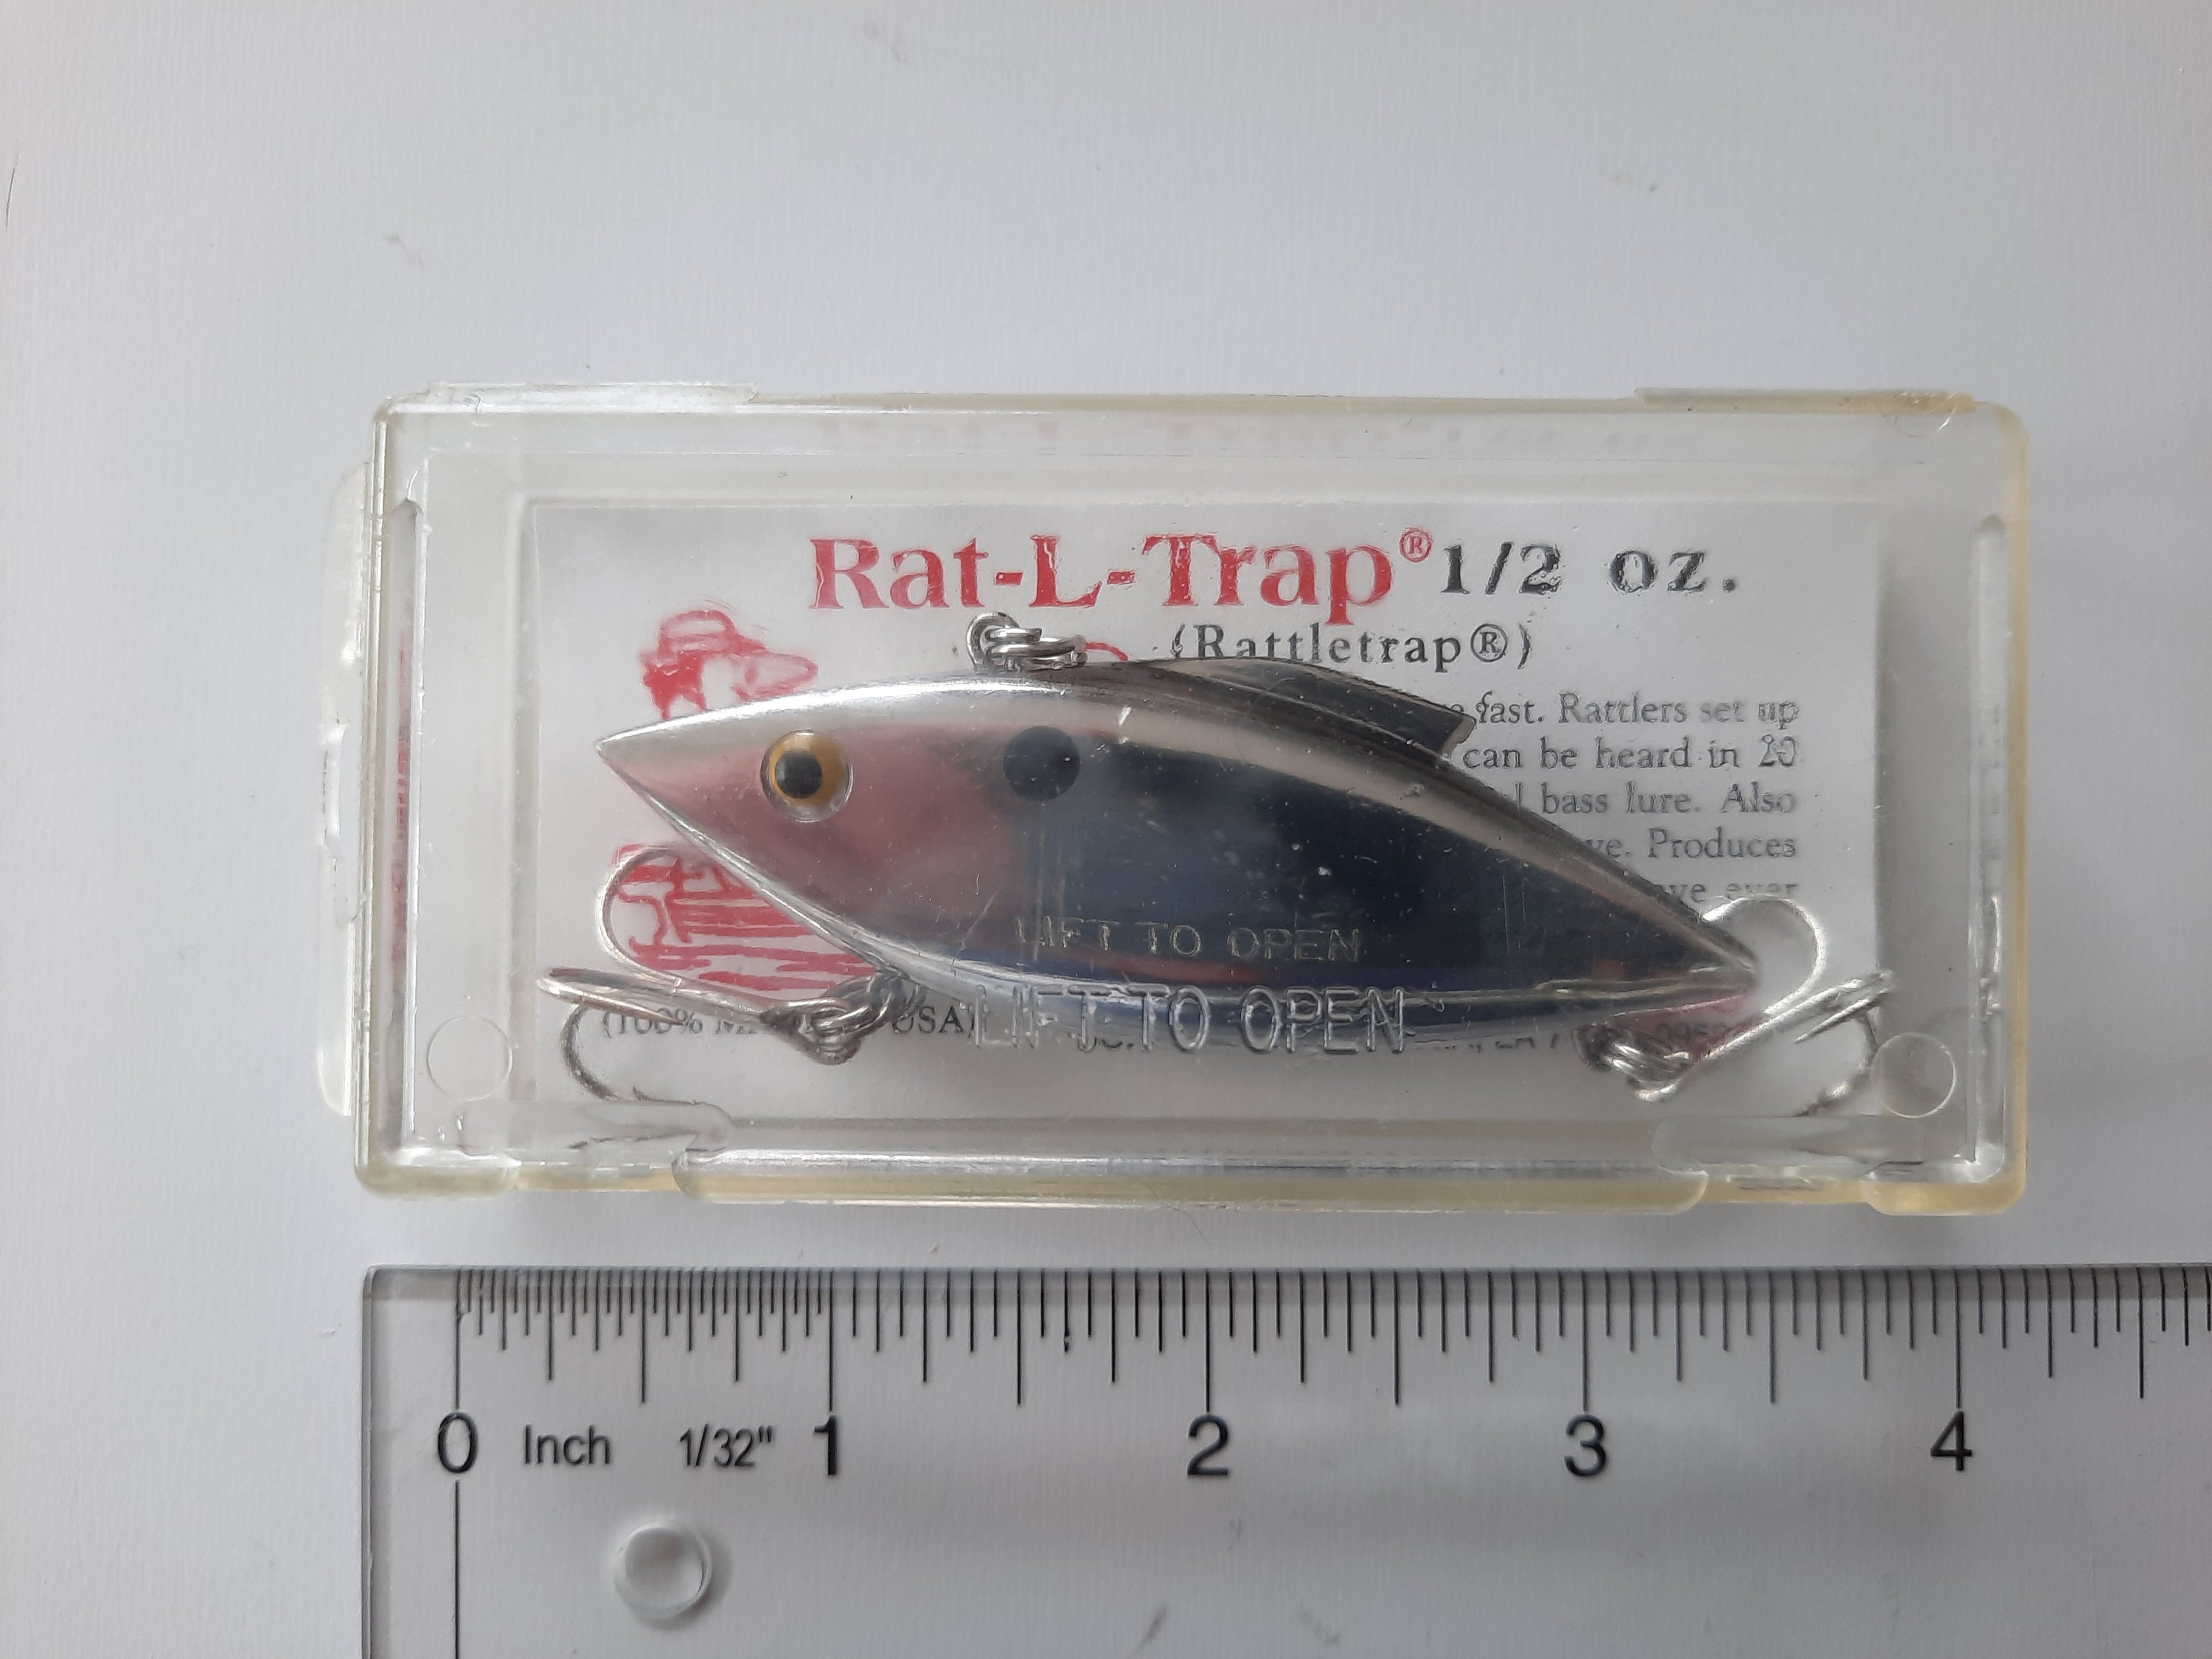 Vintage 1970s Bass Lure: Bill Lewis Lures, Rat-l-trap, Chrome/black Top, 3,  1/2 Oz. Like New in Original Package Scarce 